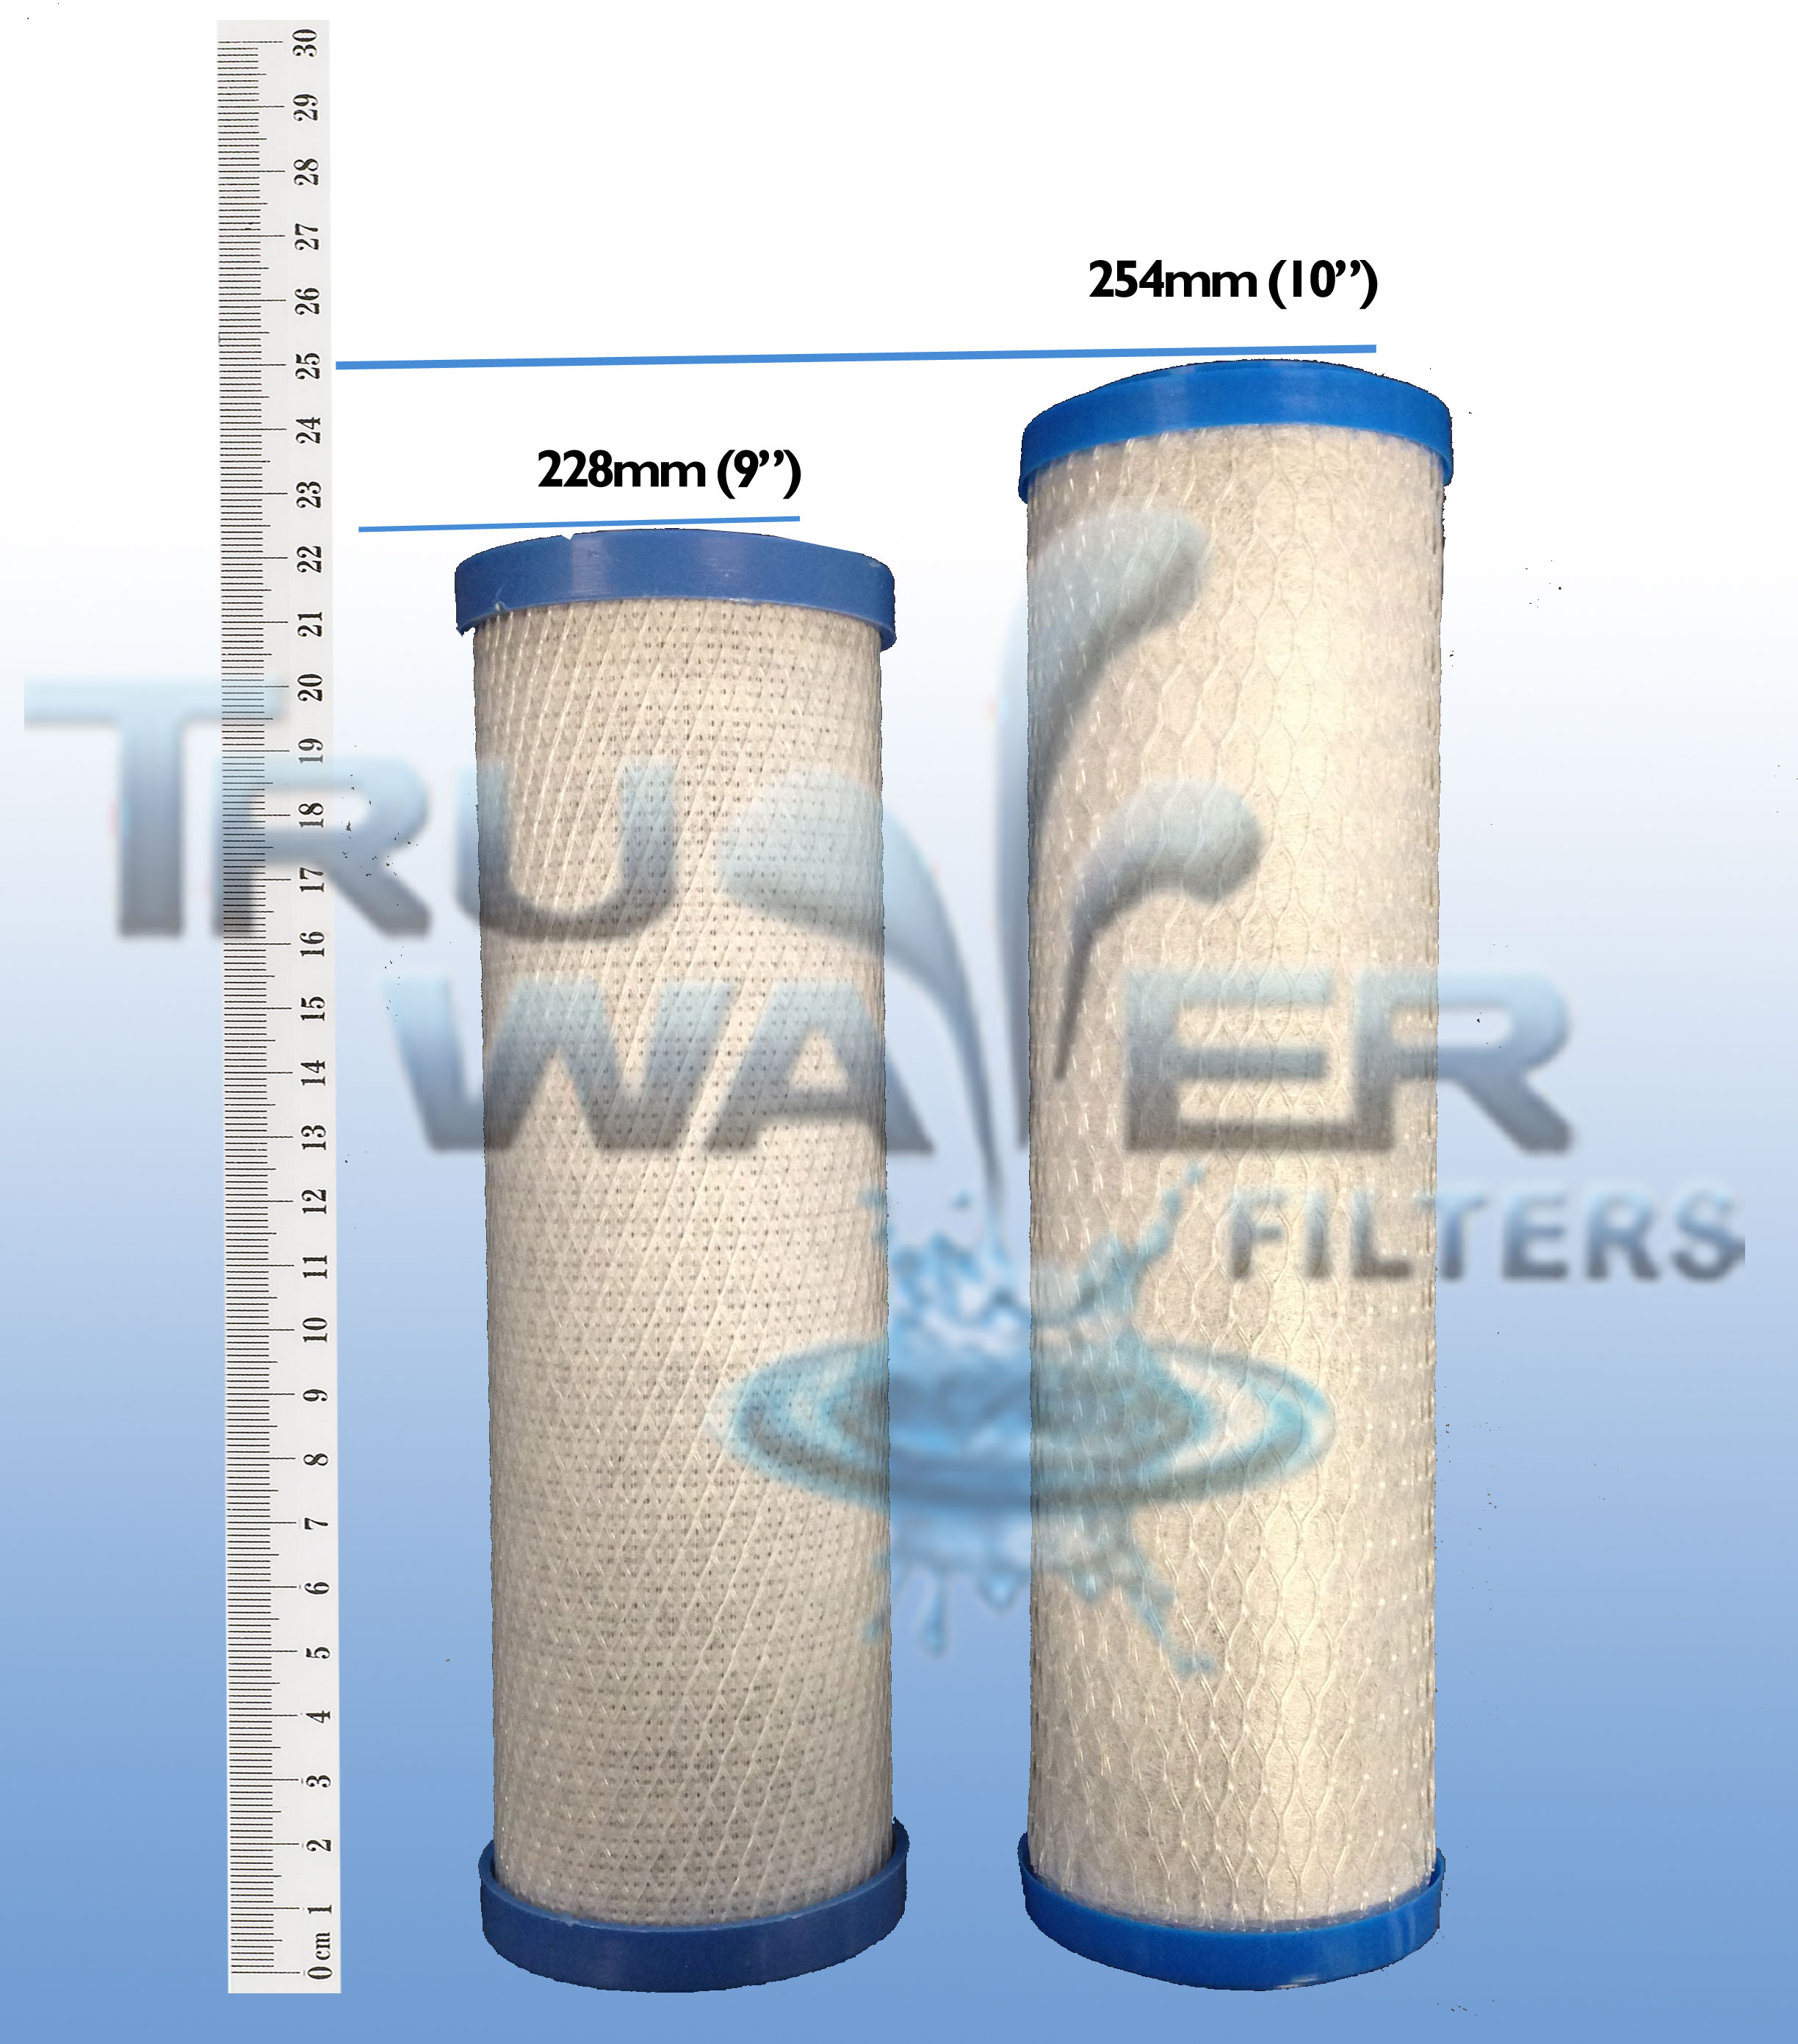 What size is my water filter?